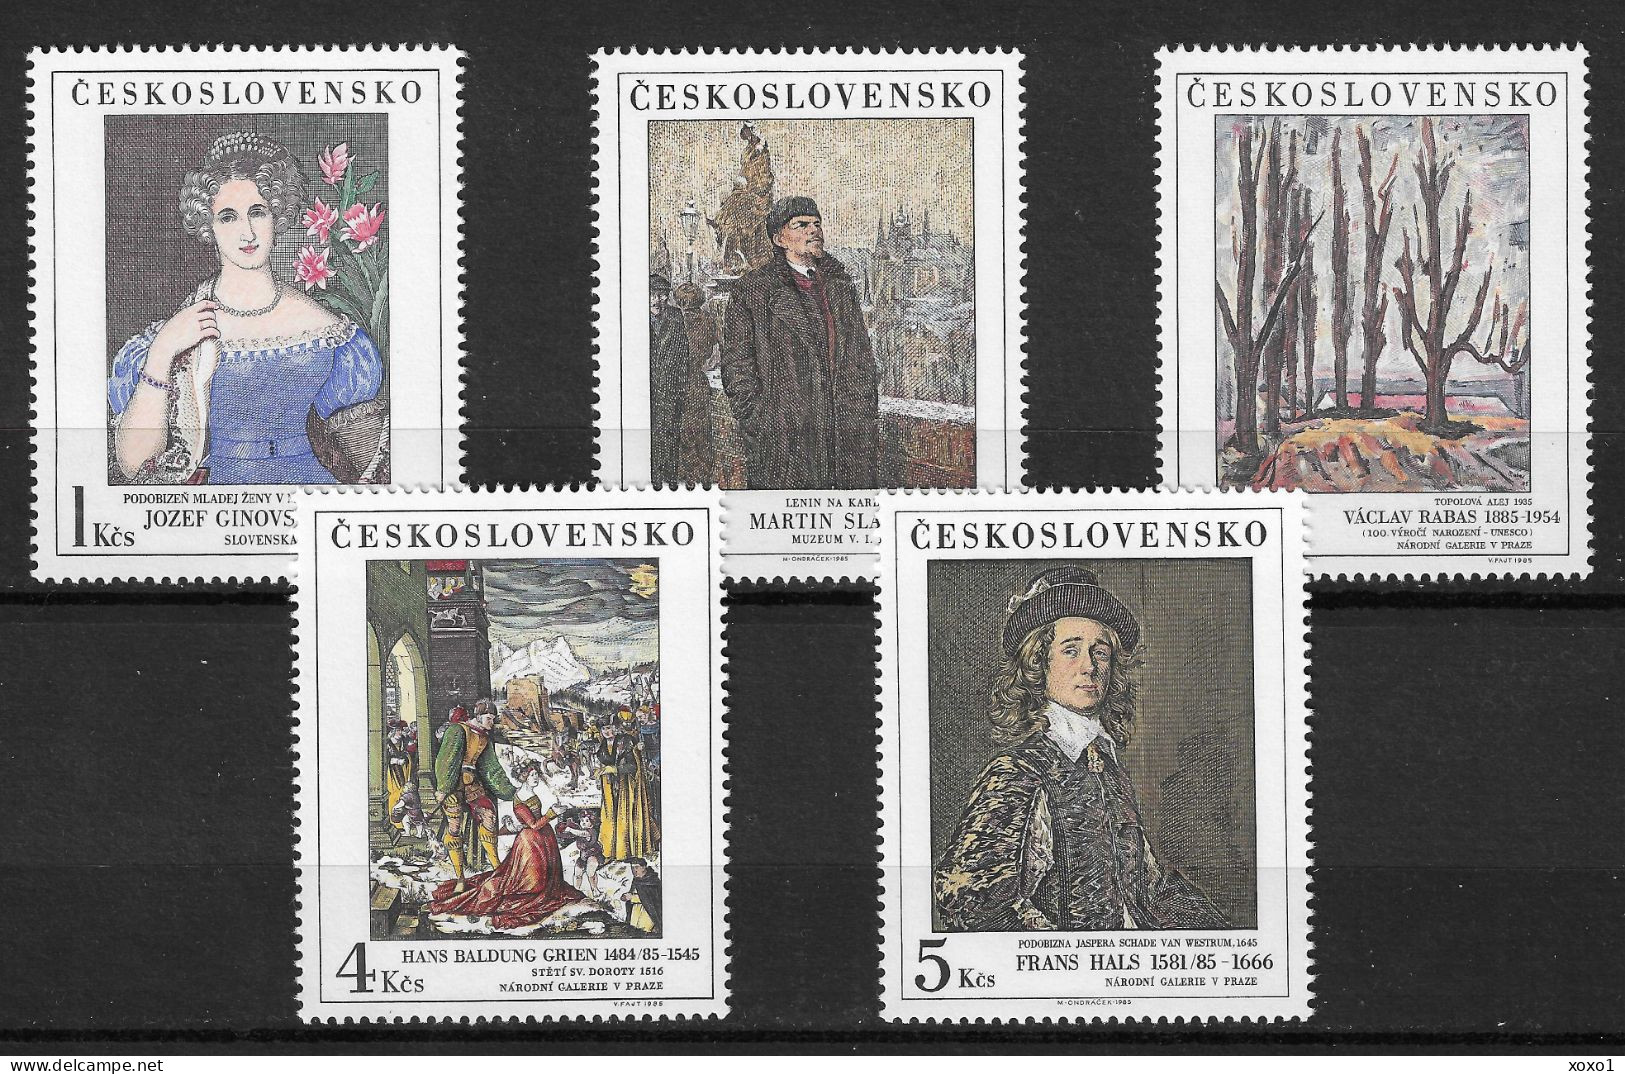 Czechoslovakia 1985 MiNr. 2841 - 2845 National Galleries (XVIII) Art, Painting, Frans Hals 5V  MNH**  6.50 € - Other & Unclassified